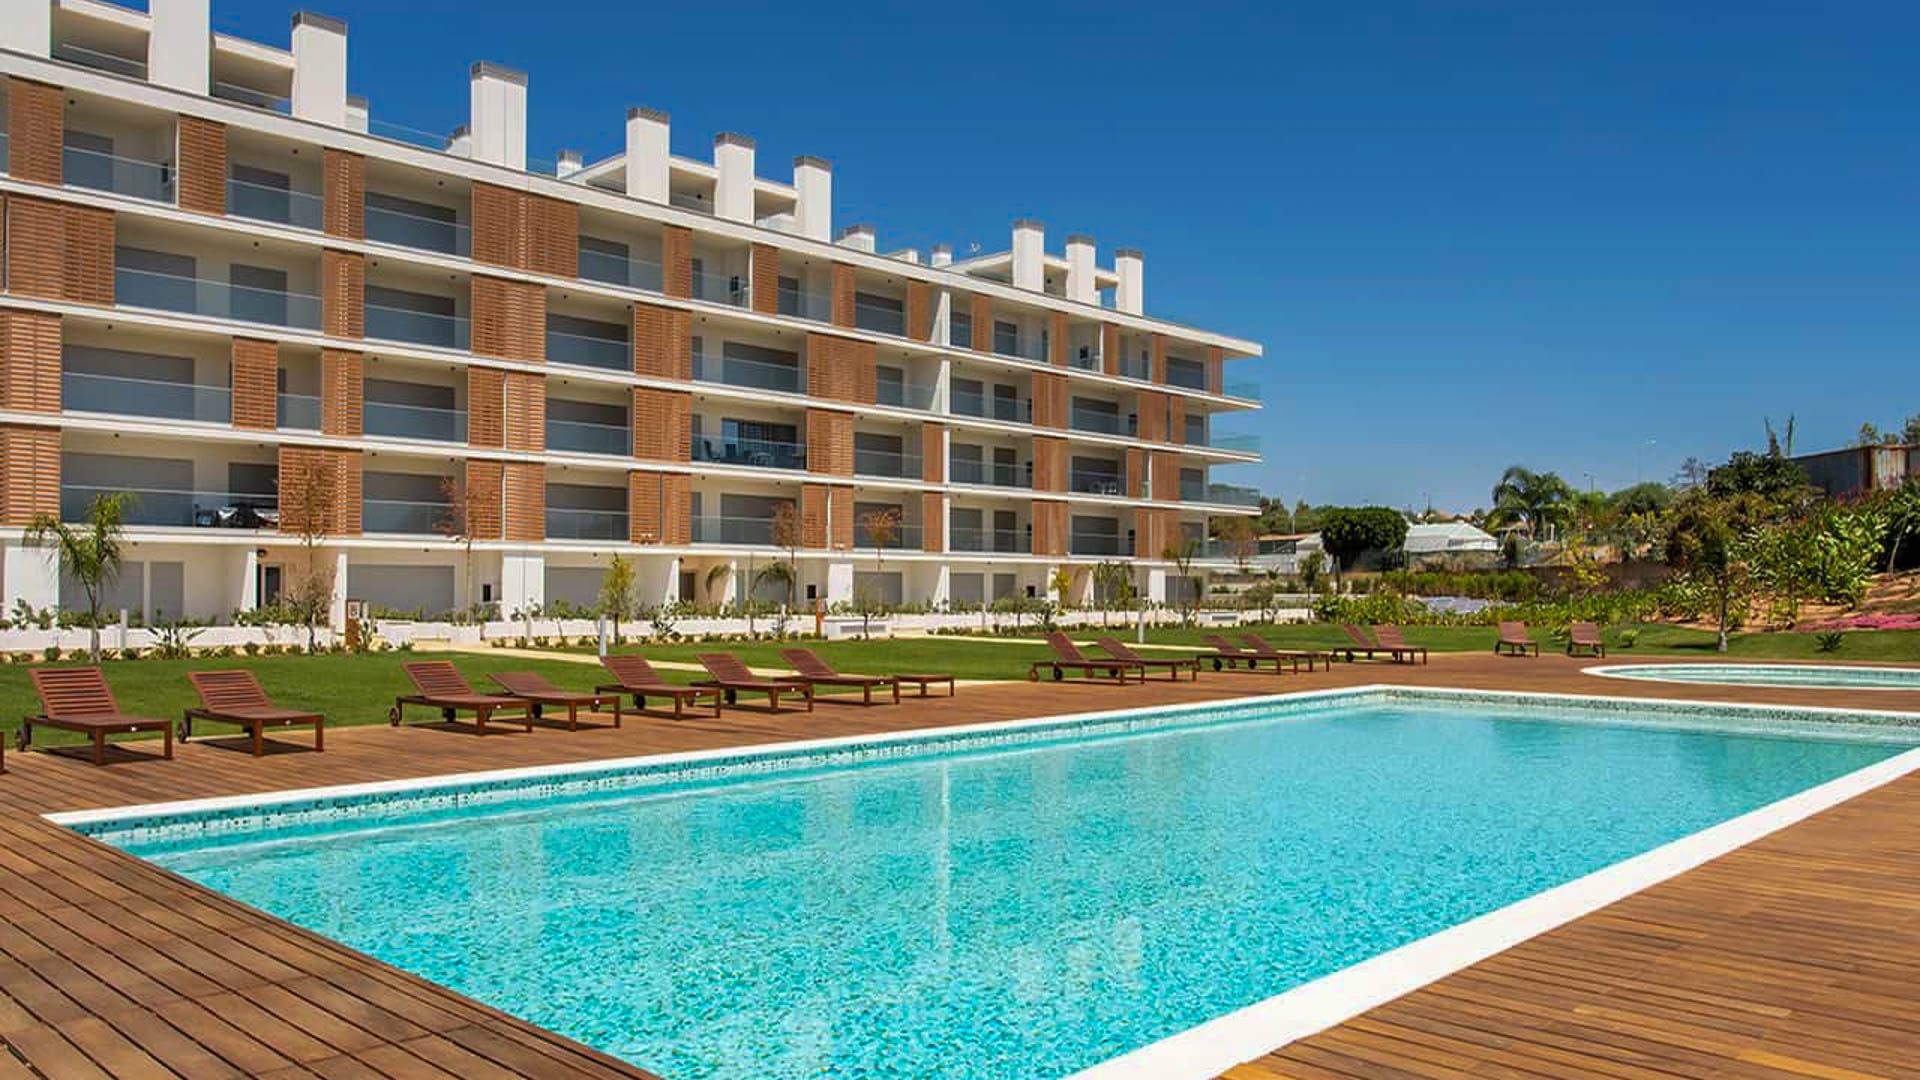 New luxury 3 bedroom Apartment with pool, Albufeira | VM1867 Luxury large 3 bedroom apartments in a new Eco friendly development, just a stone’s throw from Albufeira’s stunning beaches and amazing amenities.